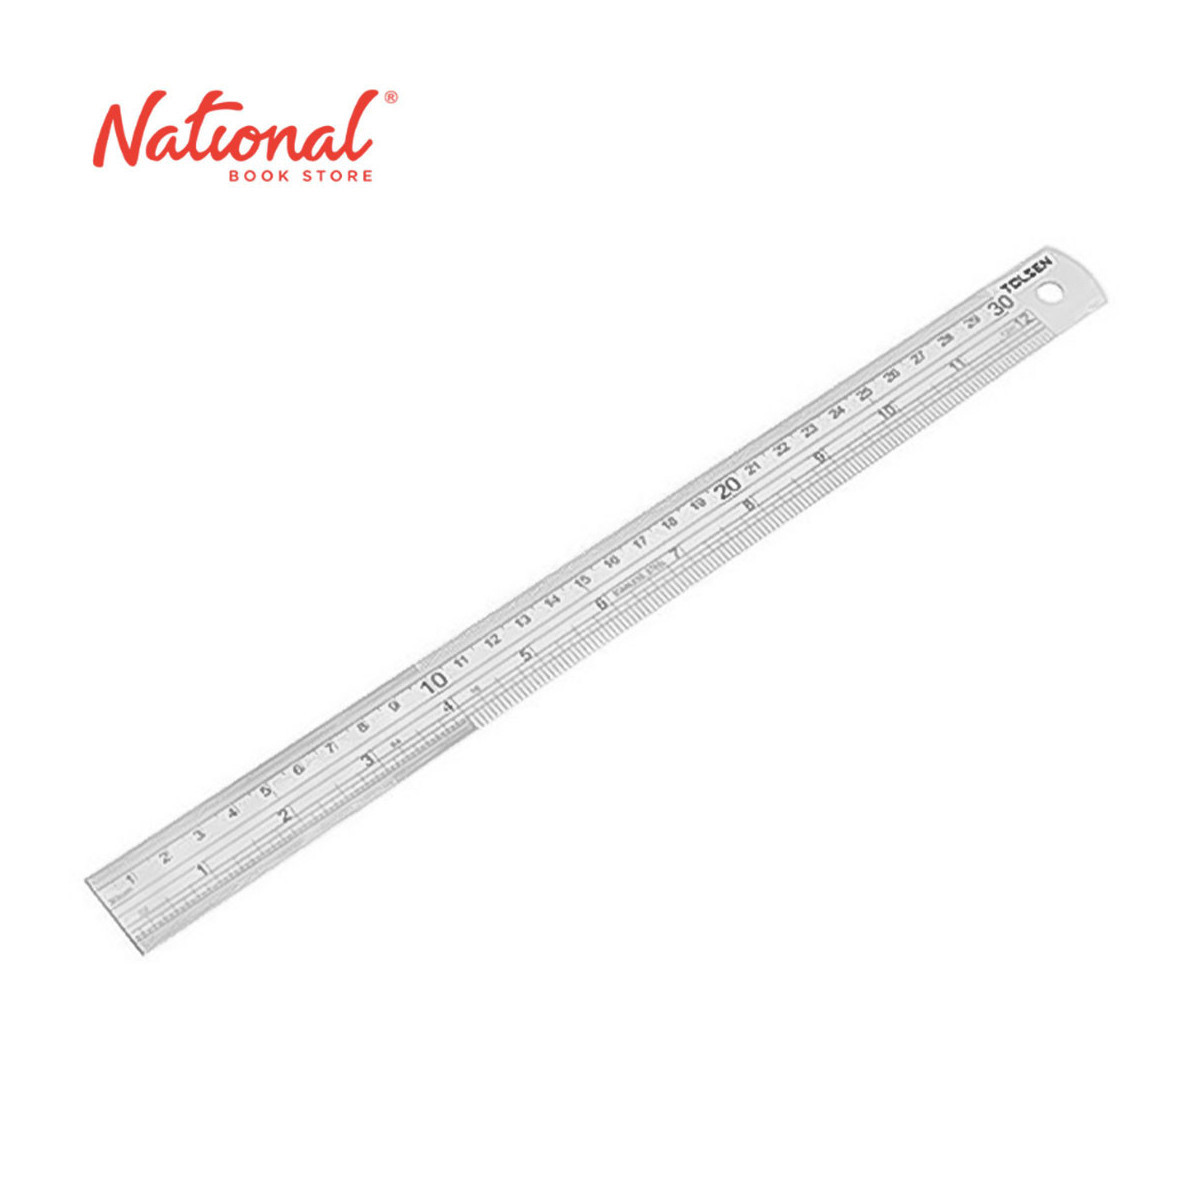 Tolsen Steel Ruler Stainless Steel 12inches 35026 300mm - Home Tools